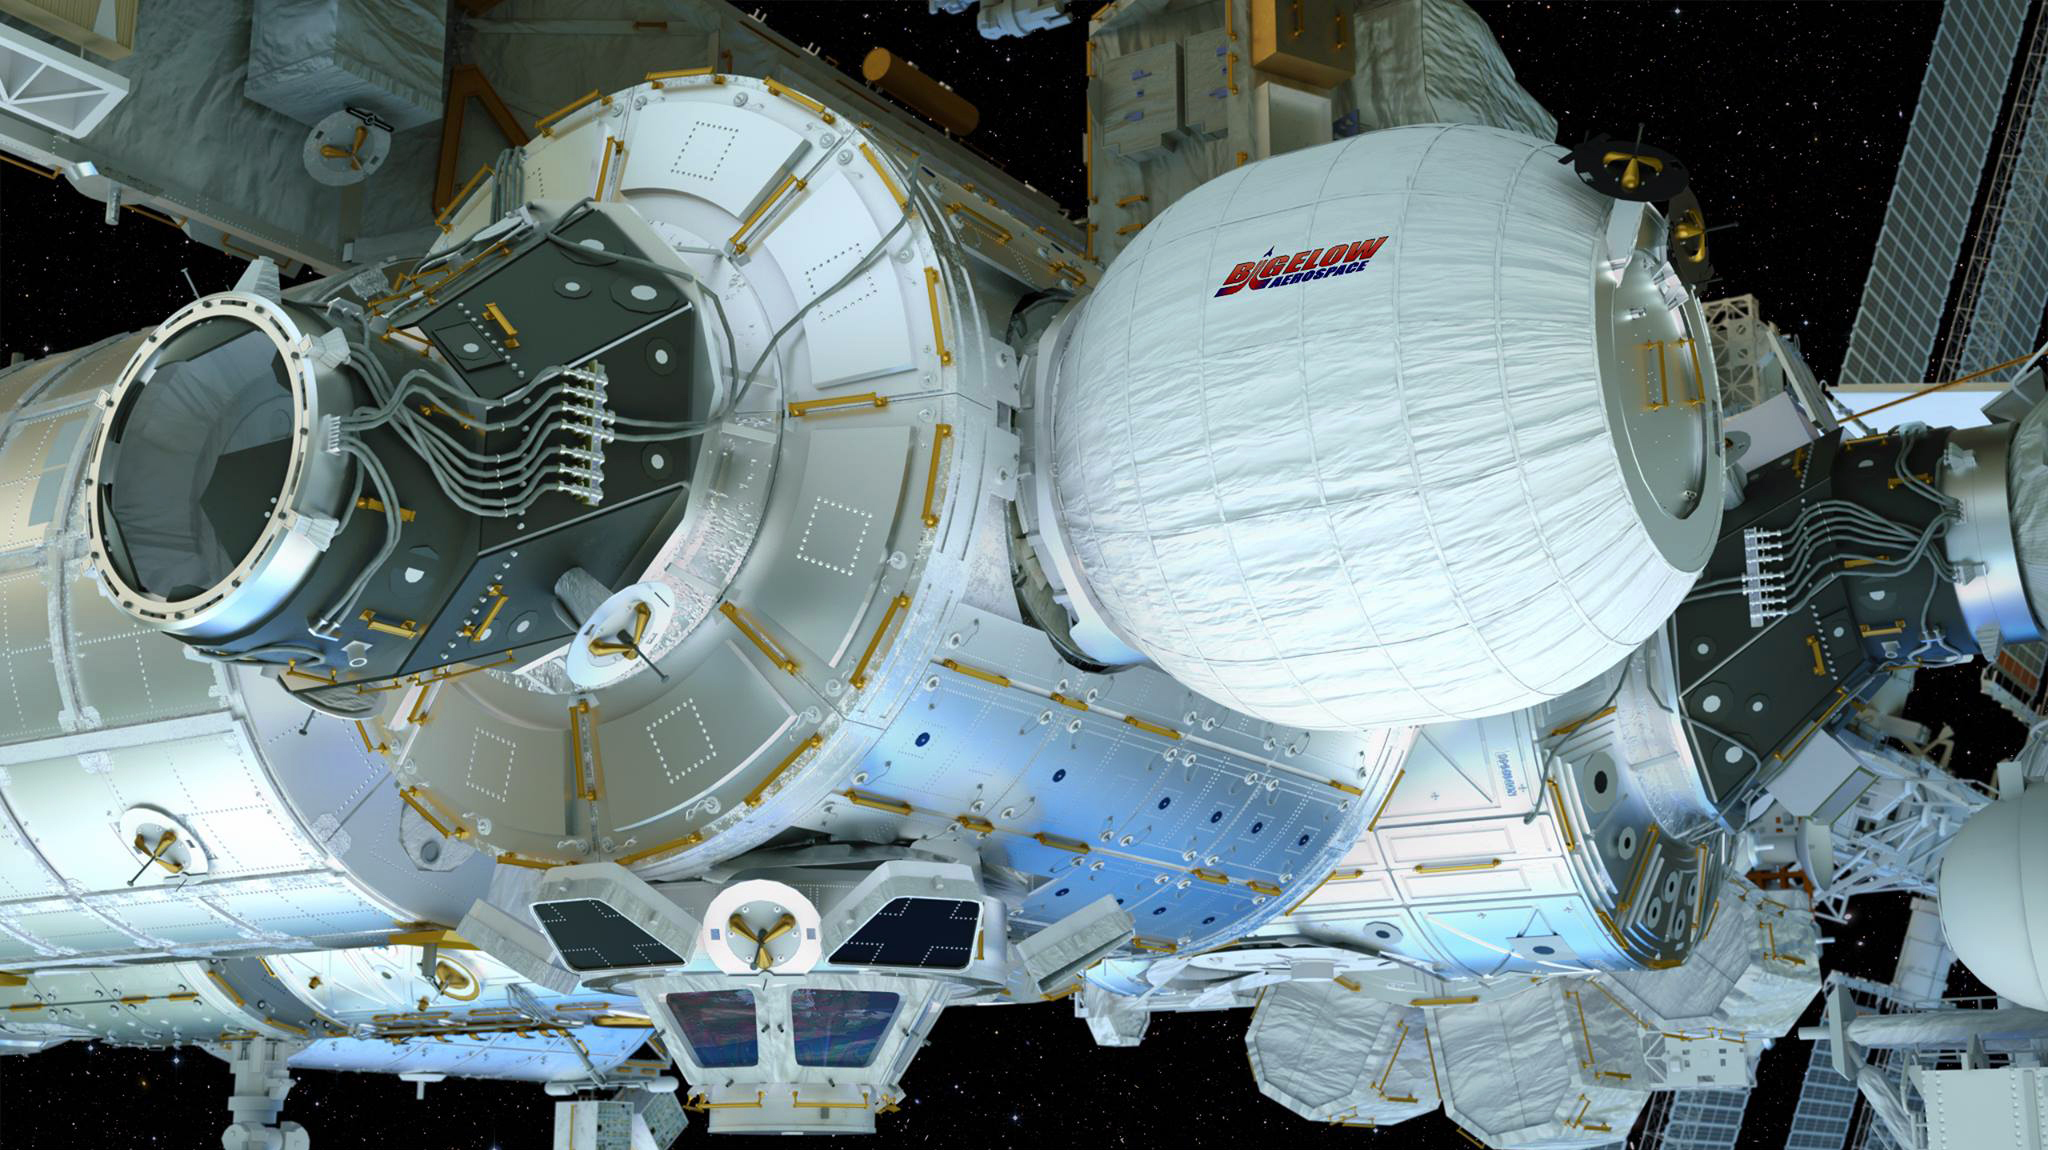 An artist's rendering of the BEAM inflatable annex attached to the side of the International Space Station.